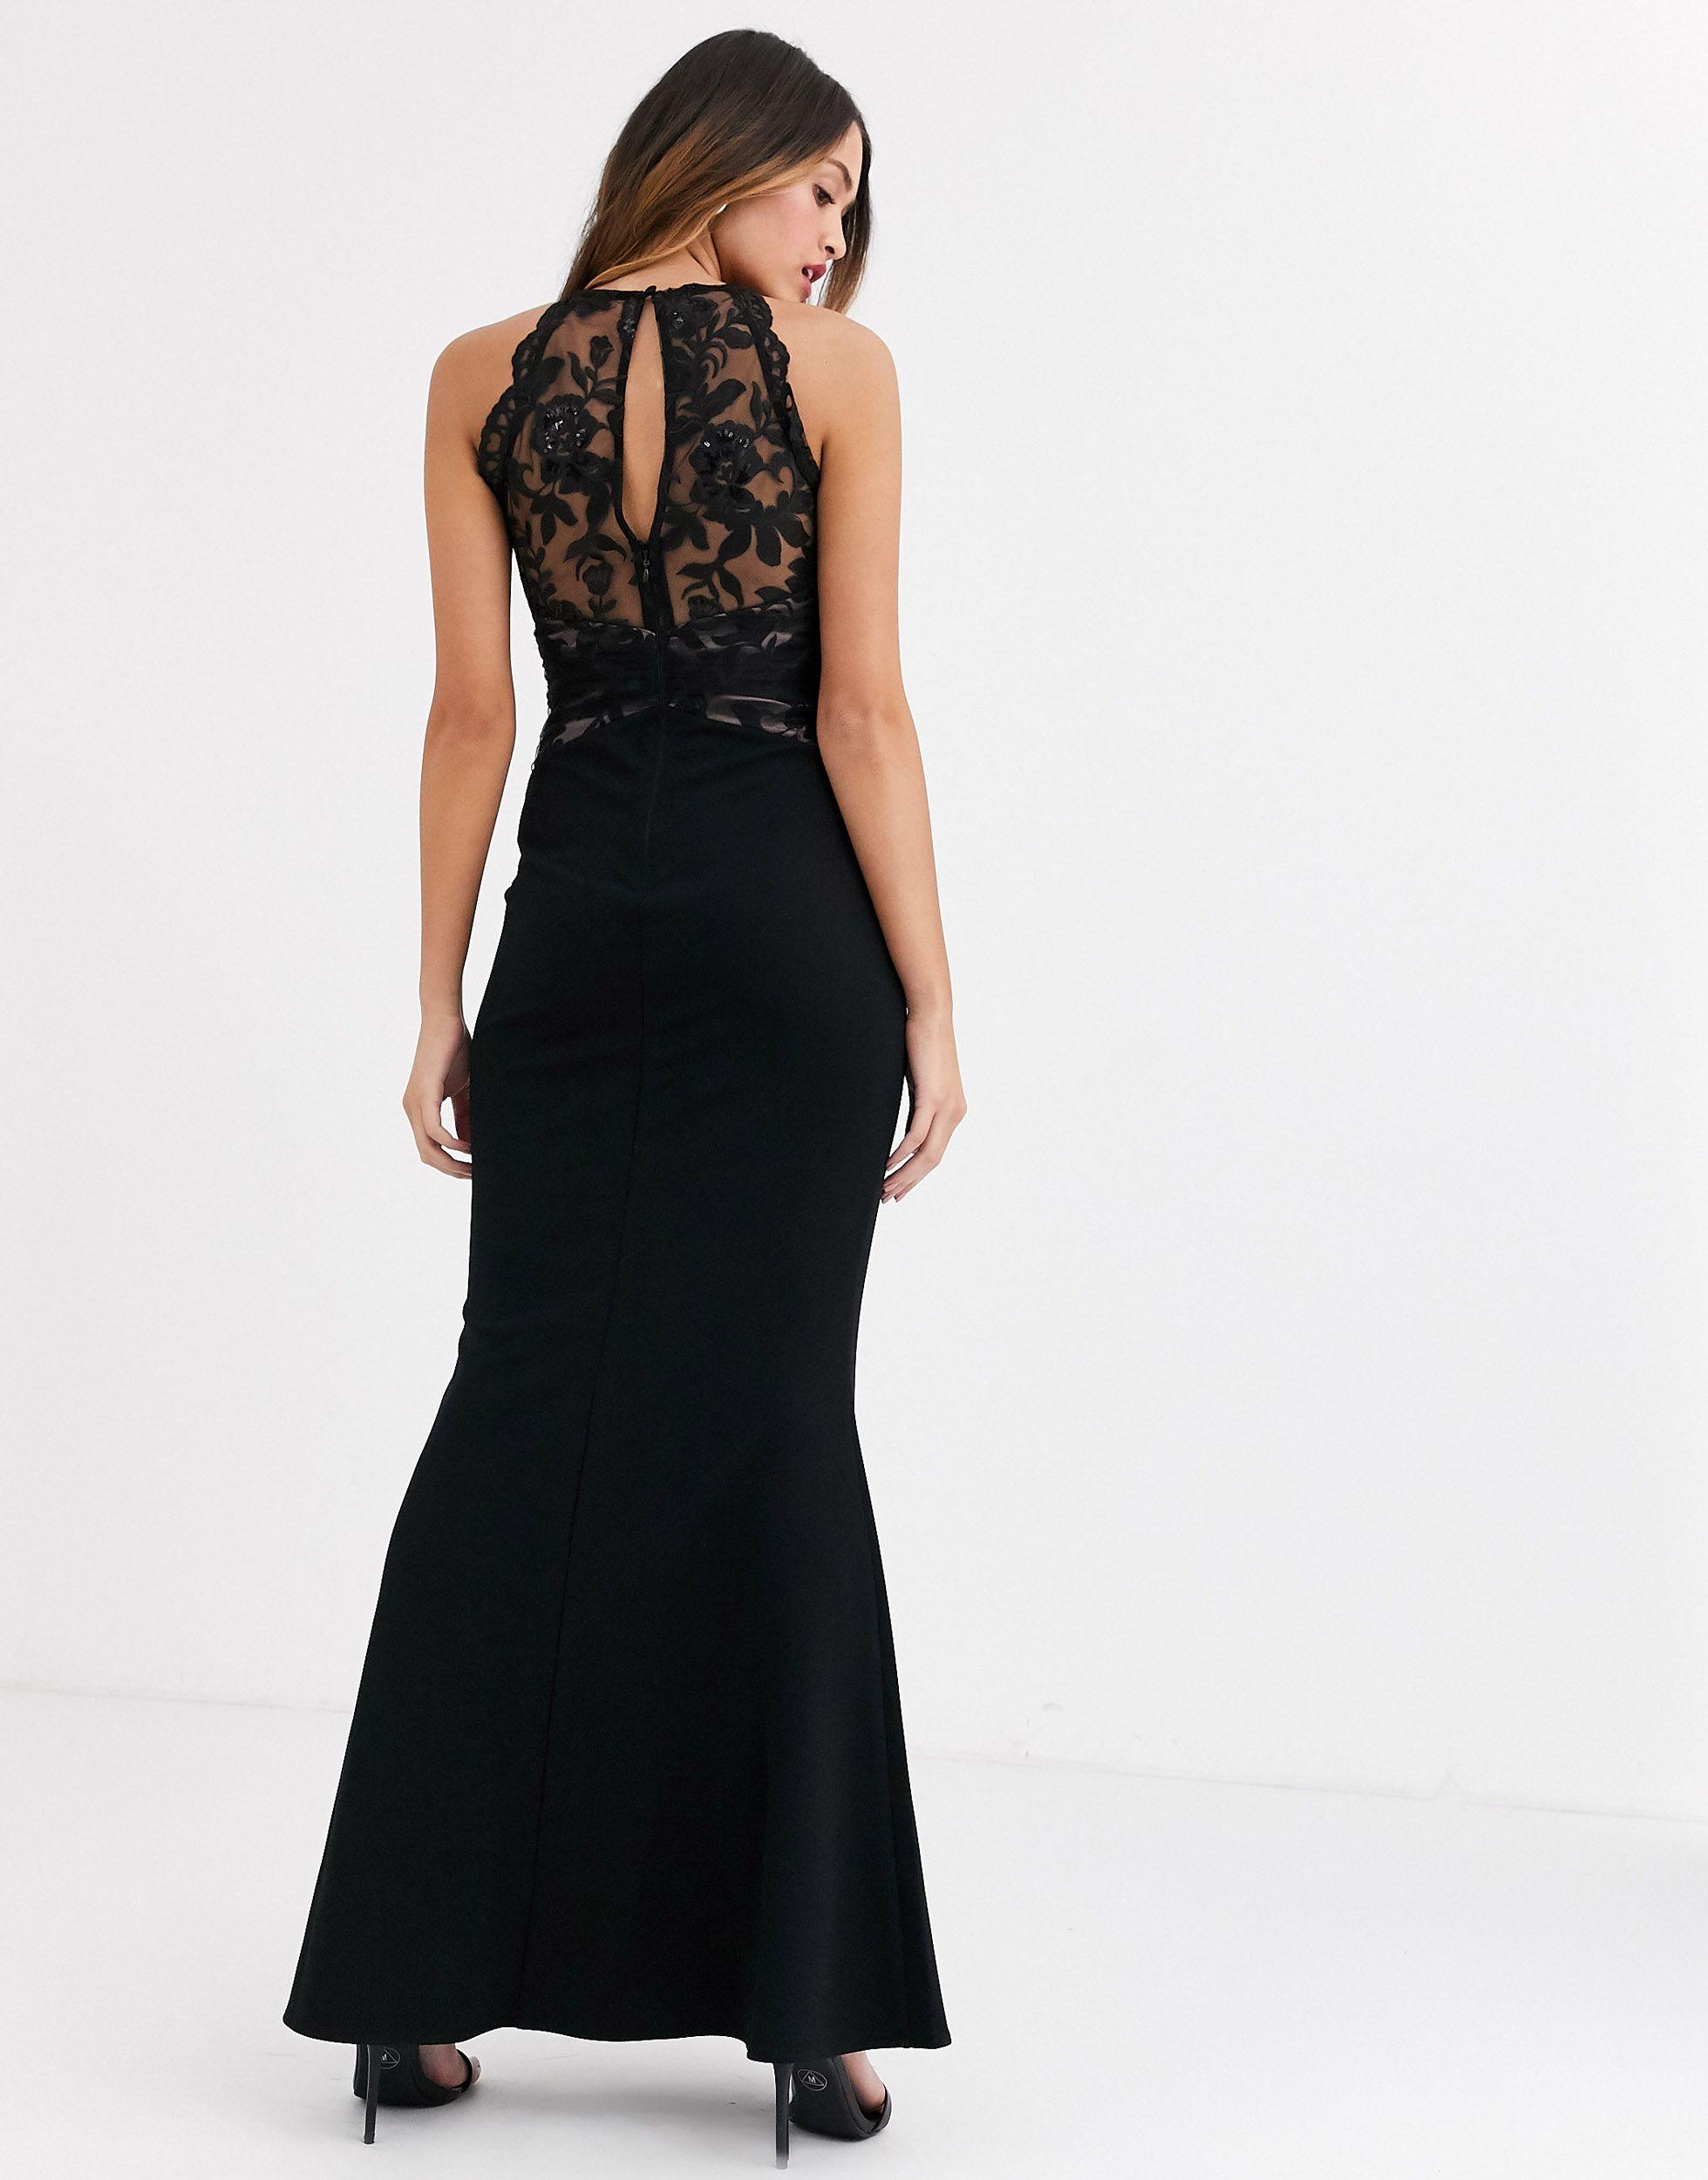 Lipsy Lace Top High Neck Maxi Dress in Black - Lyst